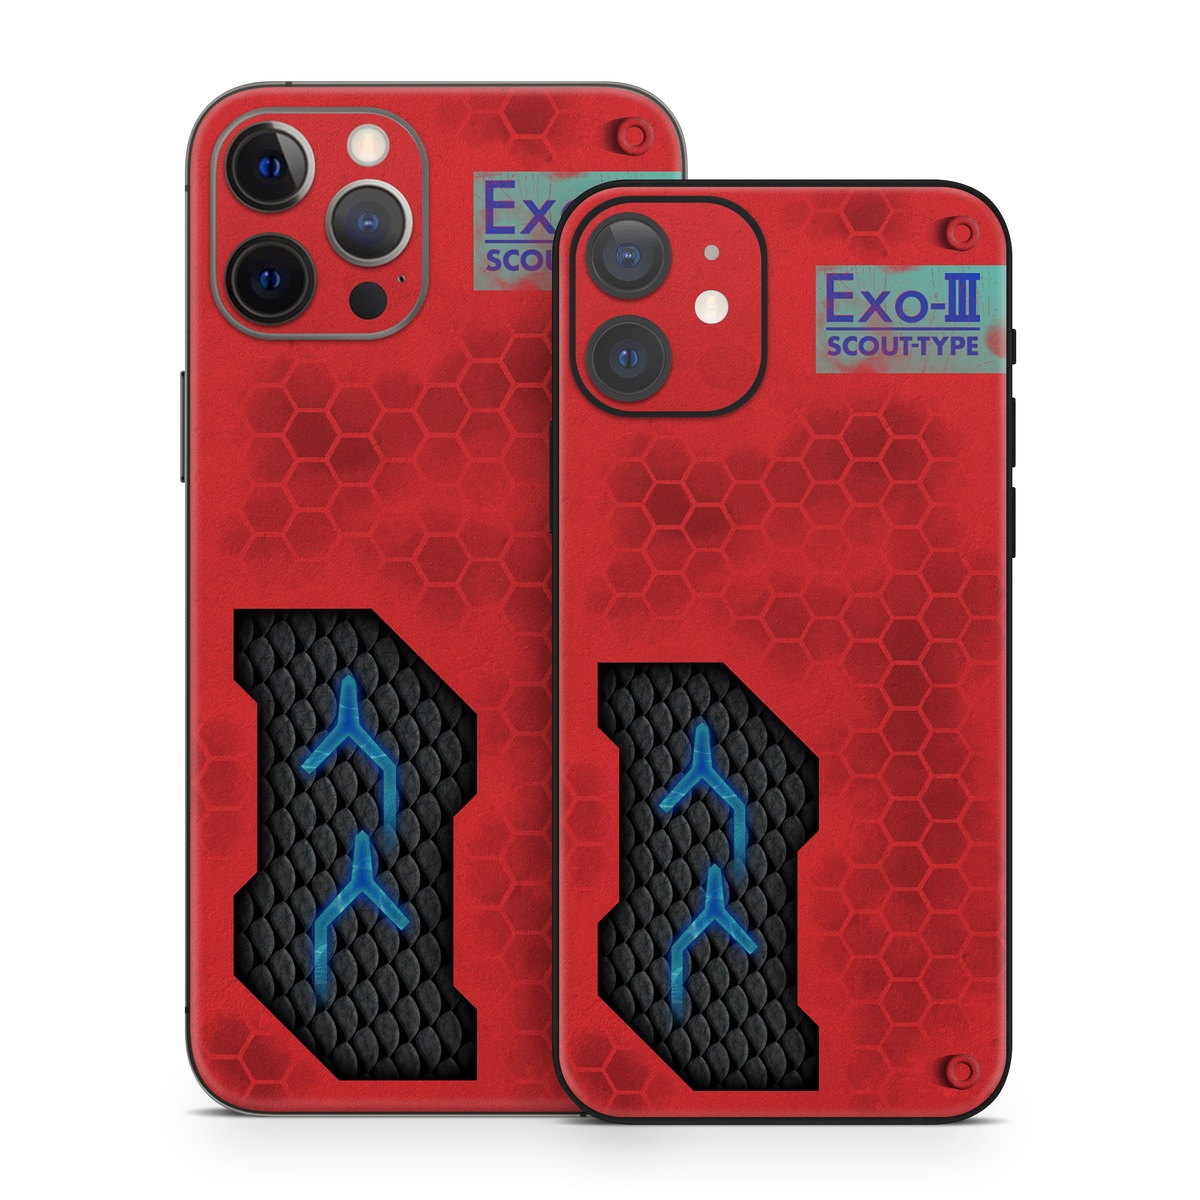 iPhone 12 Skin design with red, black, blue colors